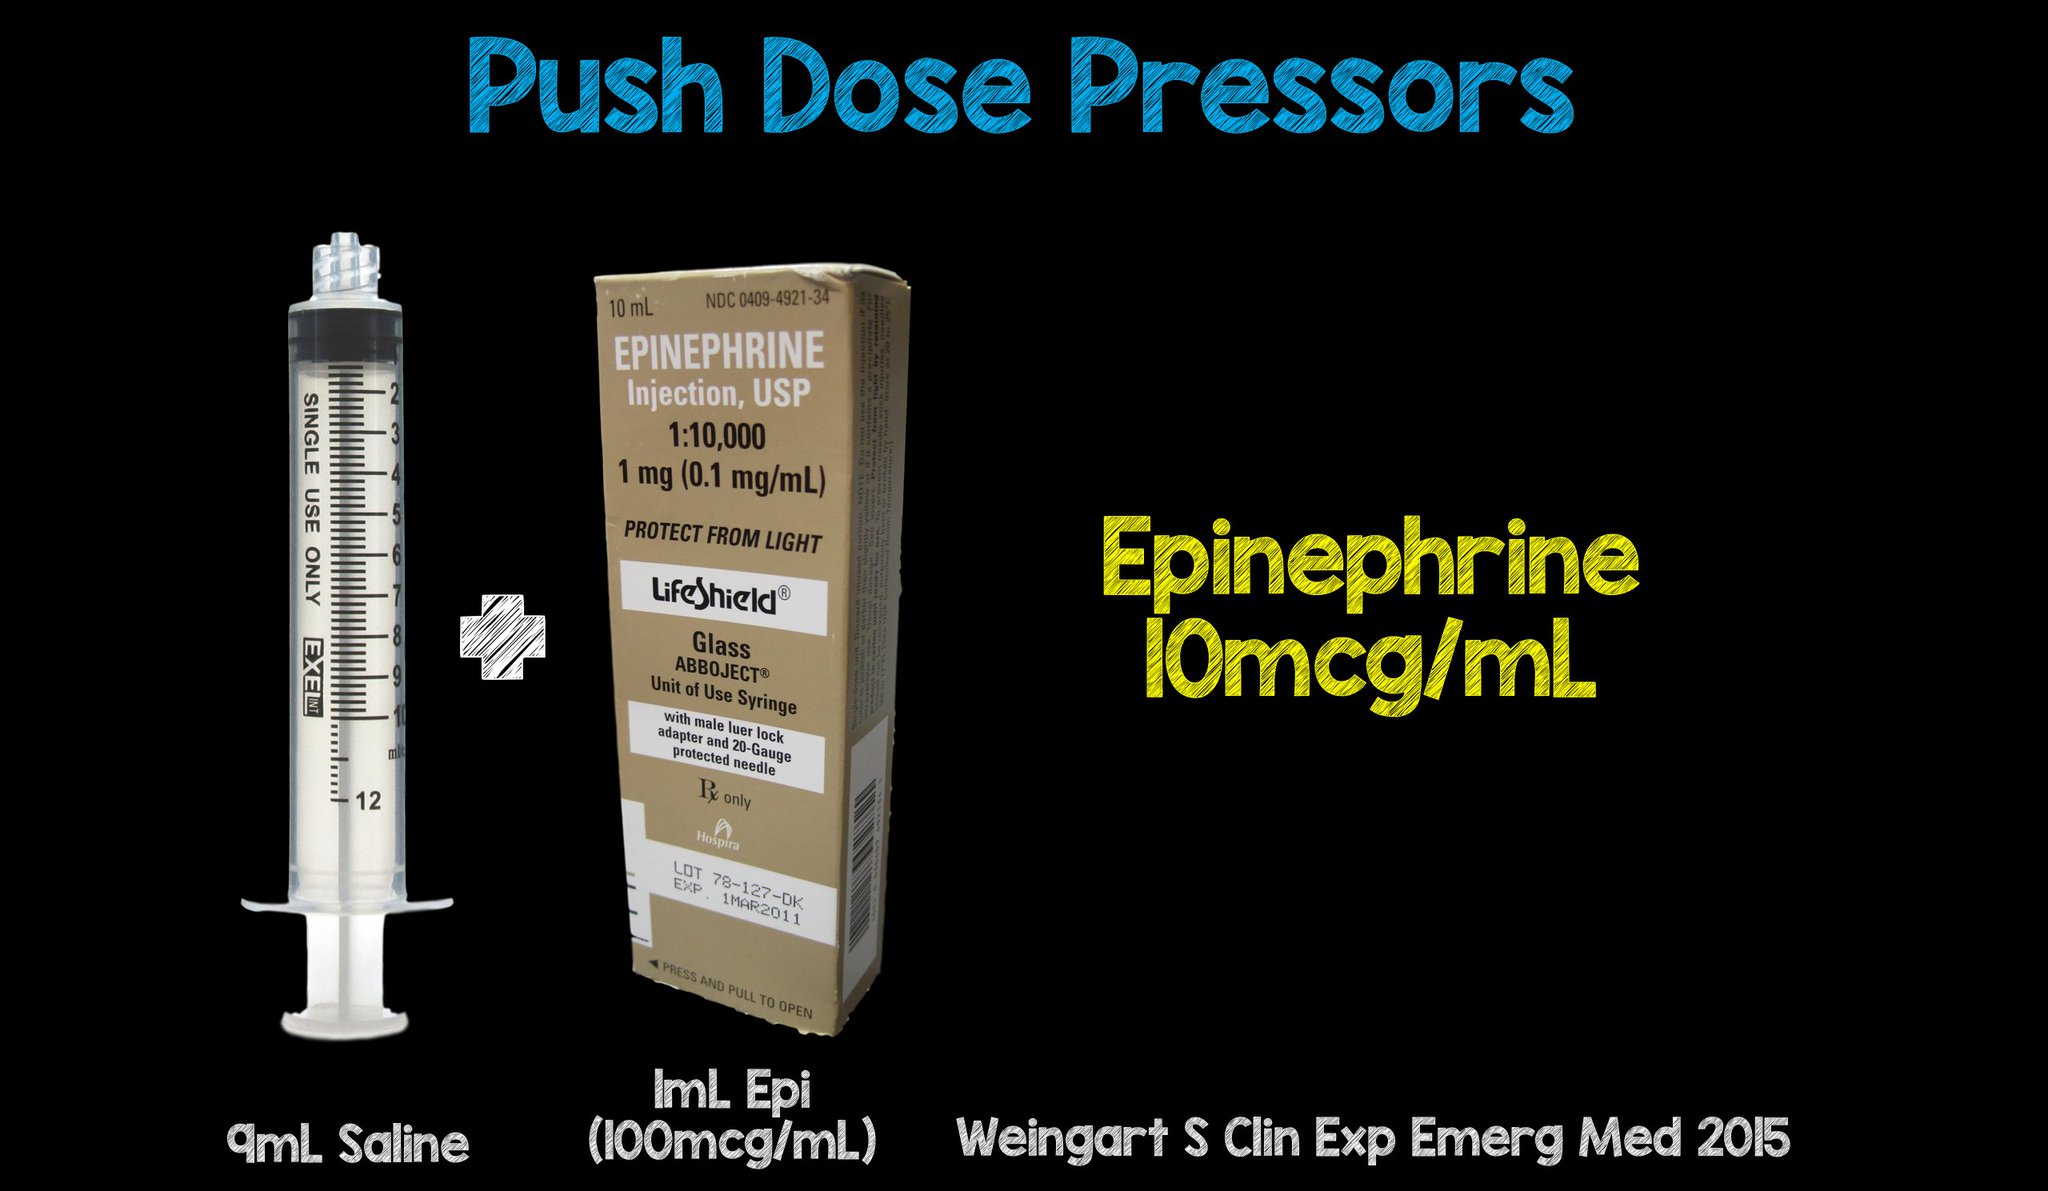 In Critical Pts, Push Dose Pressors Can Buy You Time, But Realize the Evidence is Not Robust @critcareguys #ACEP17 https://t.co/uOezYI6RUU